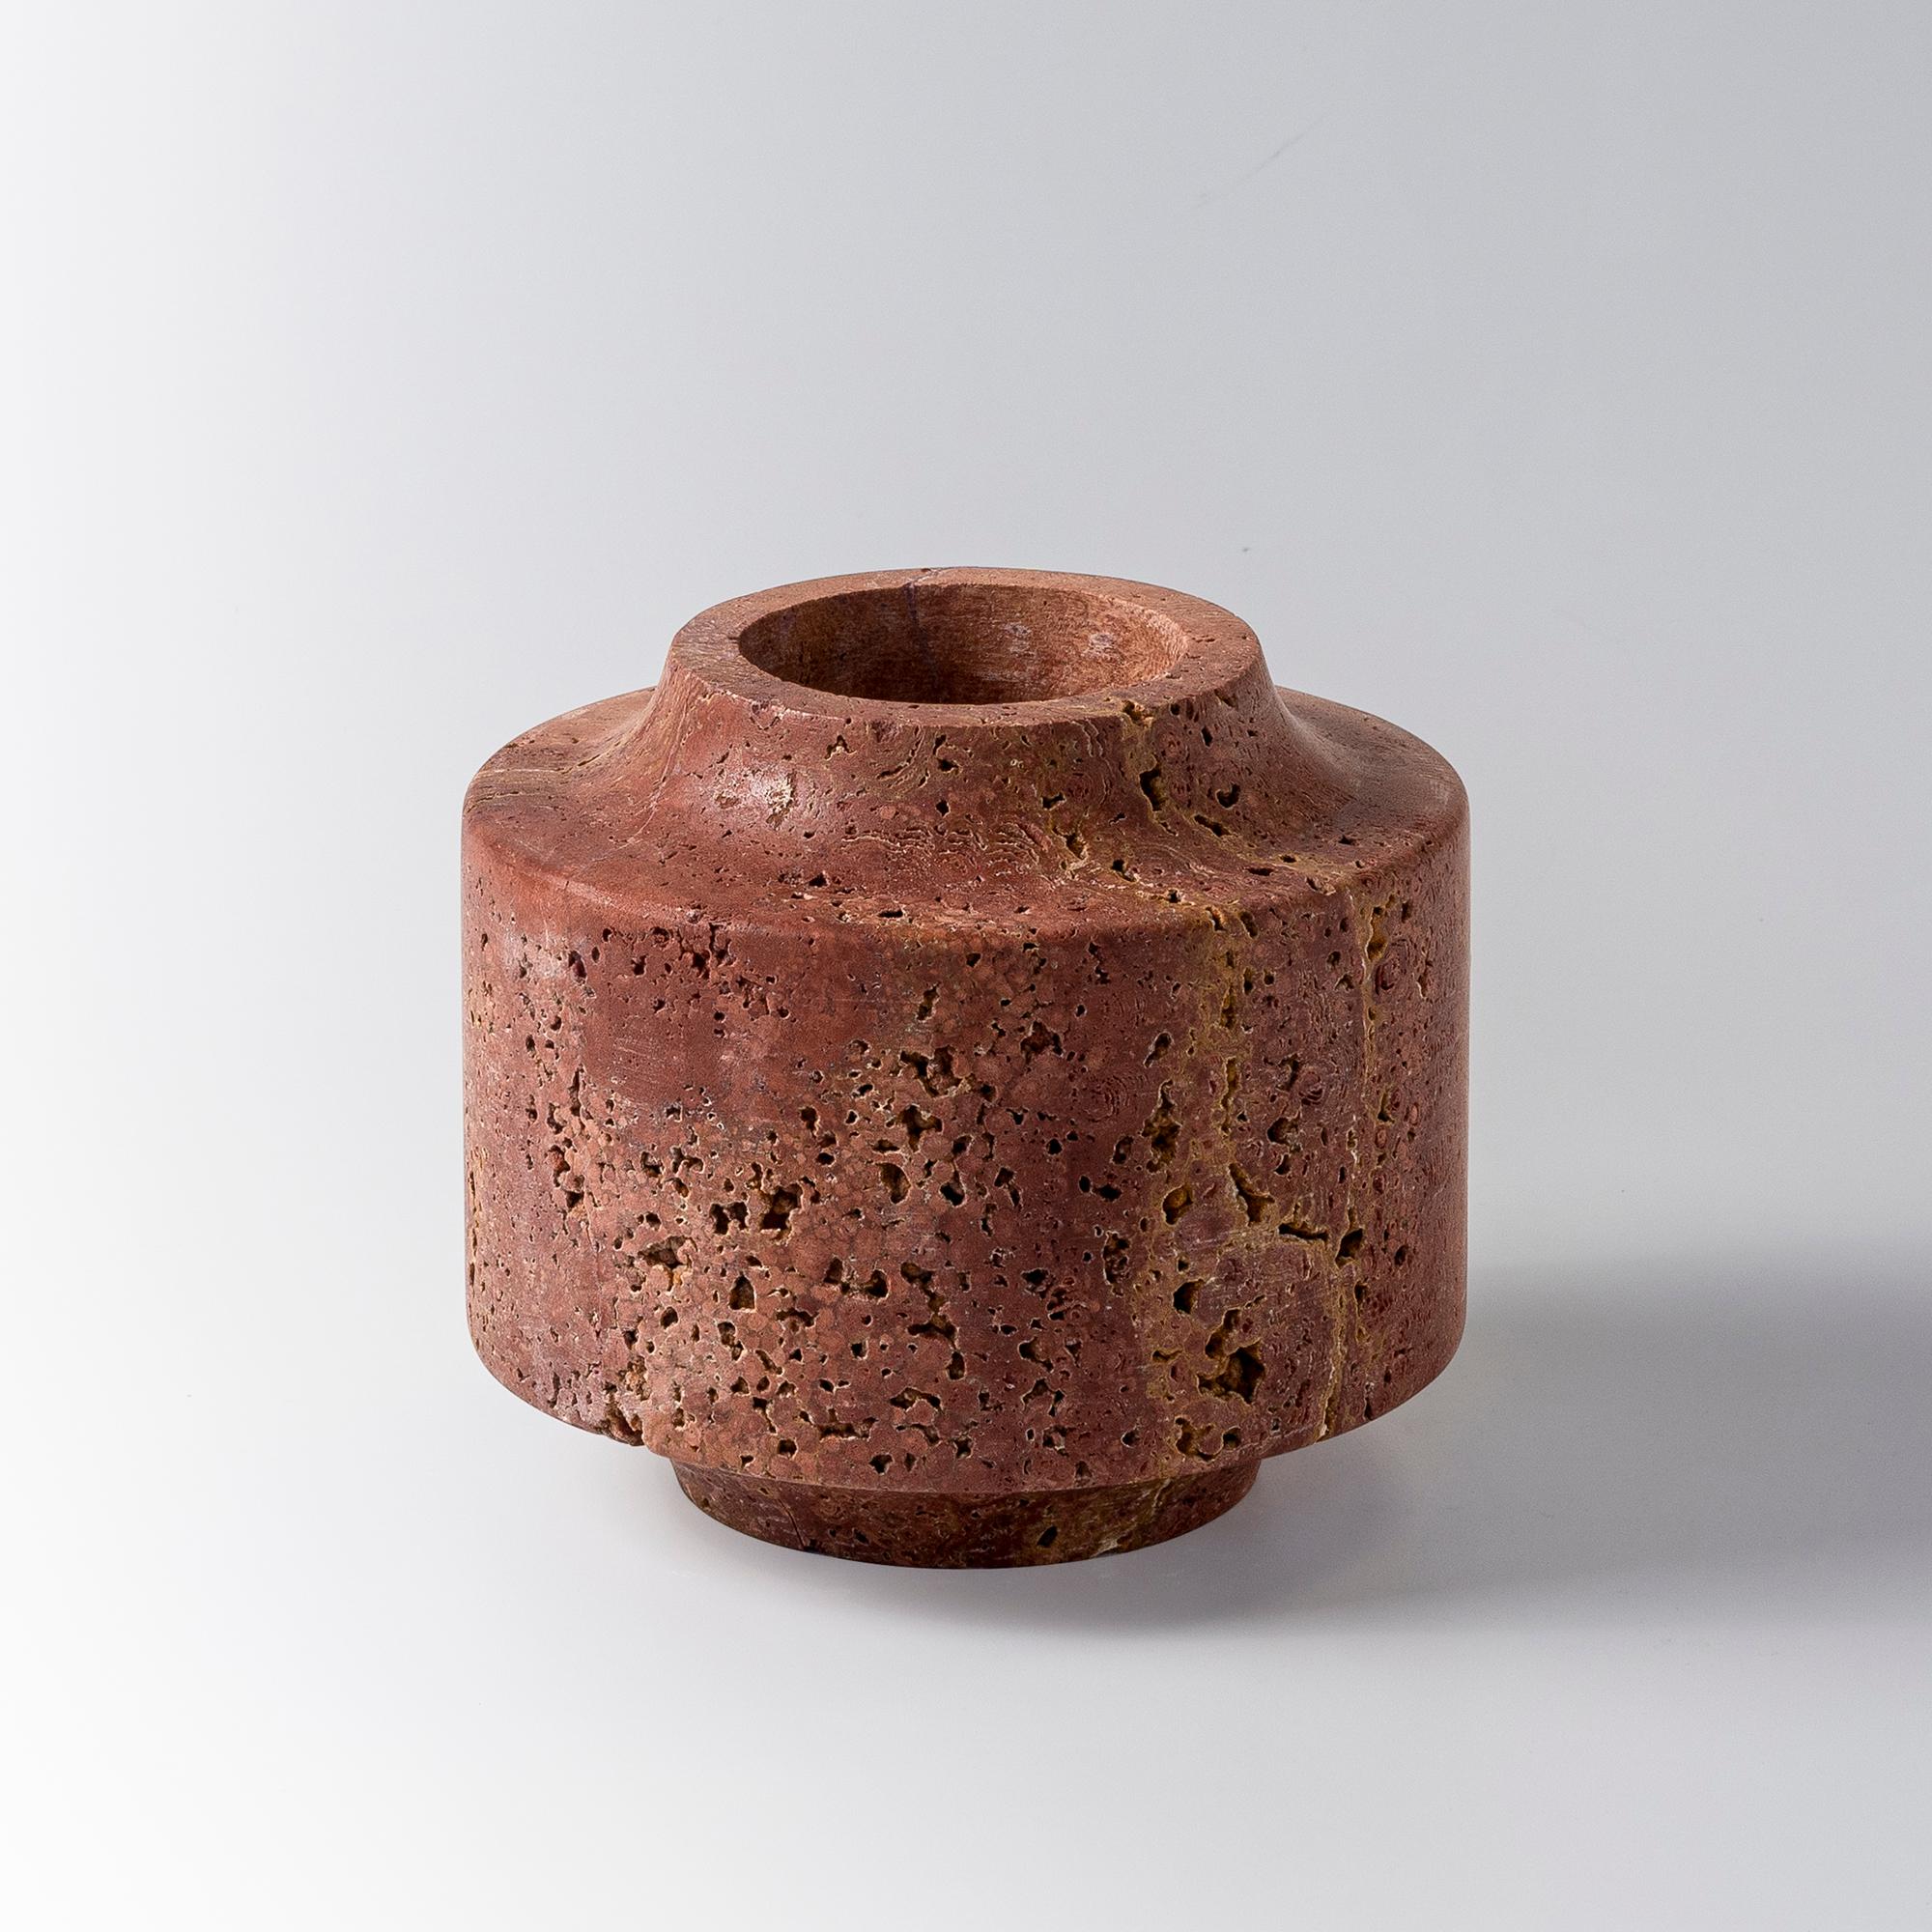 Red Travertine Pot by Etamorph
Dimensions: Ø 13 x H 12 cm.
Materials: Red Travertine.

Available in different stone options. Please contact us. 

ETAMORPH is a NYC-based design boutique studio specializing in contemporary objects, custom furniture